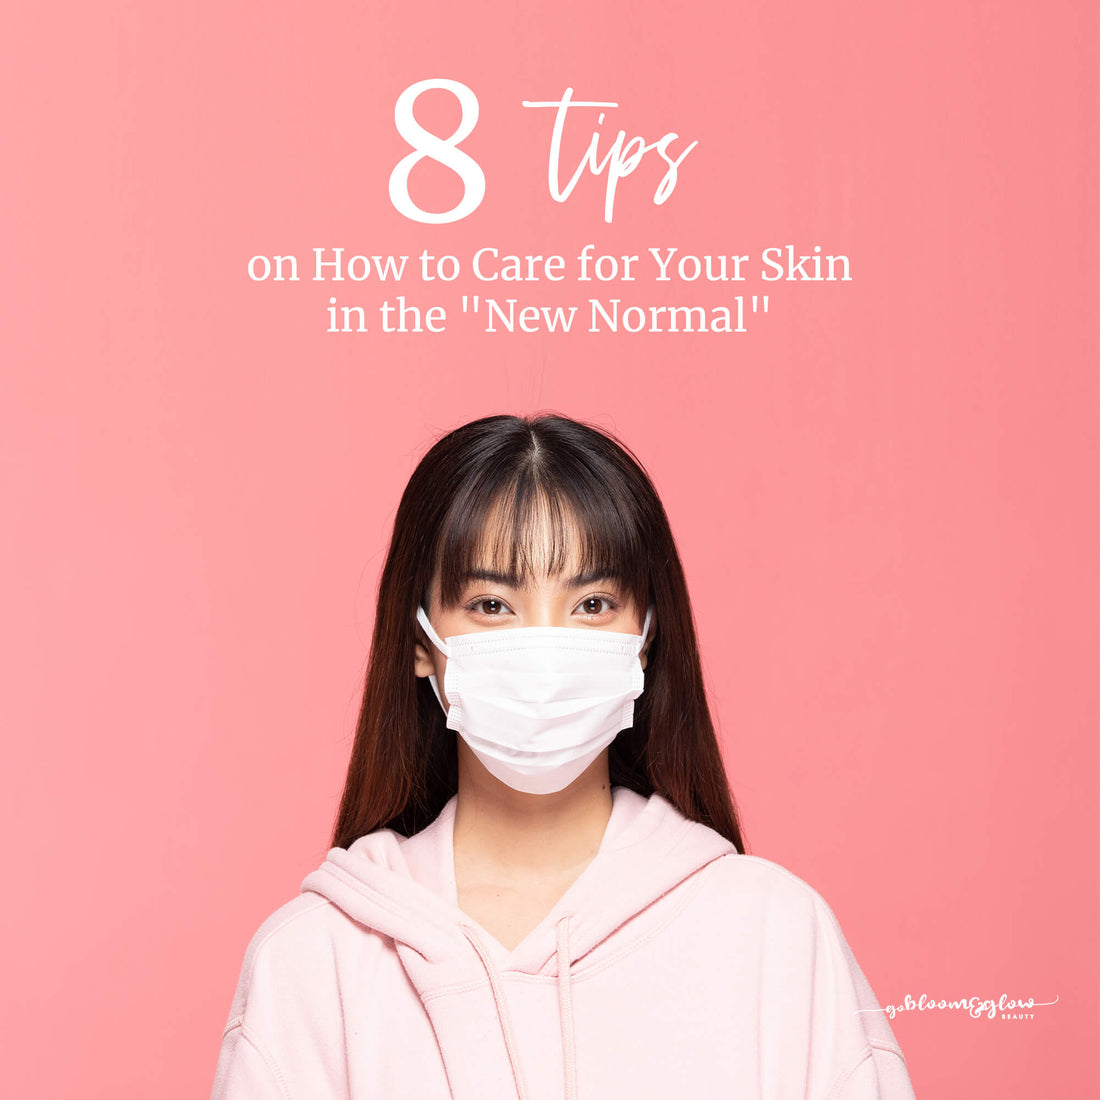 8 Tips on How to Care for Your Skin in the "New Normal"